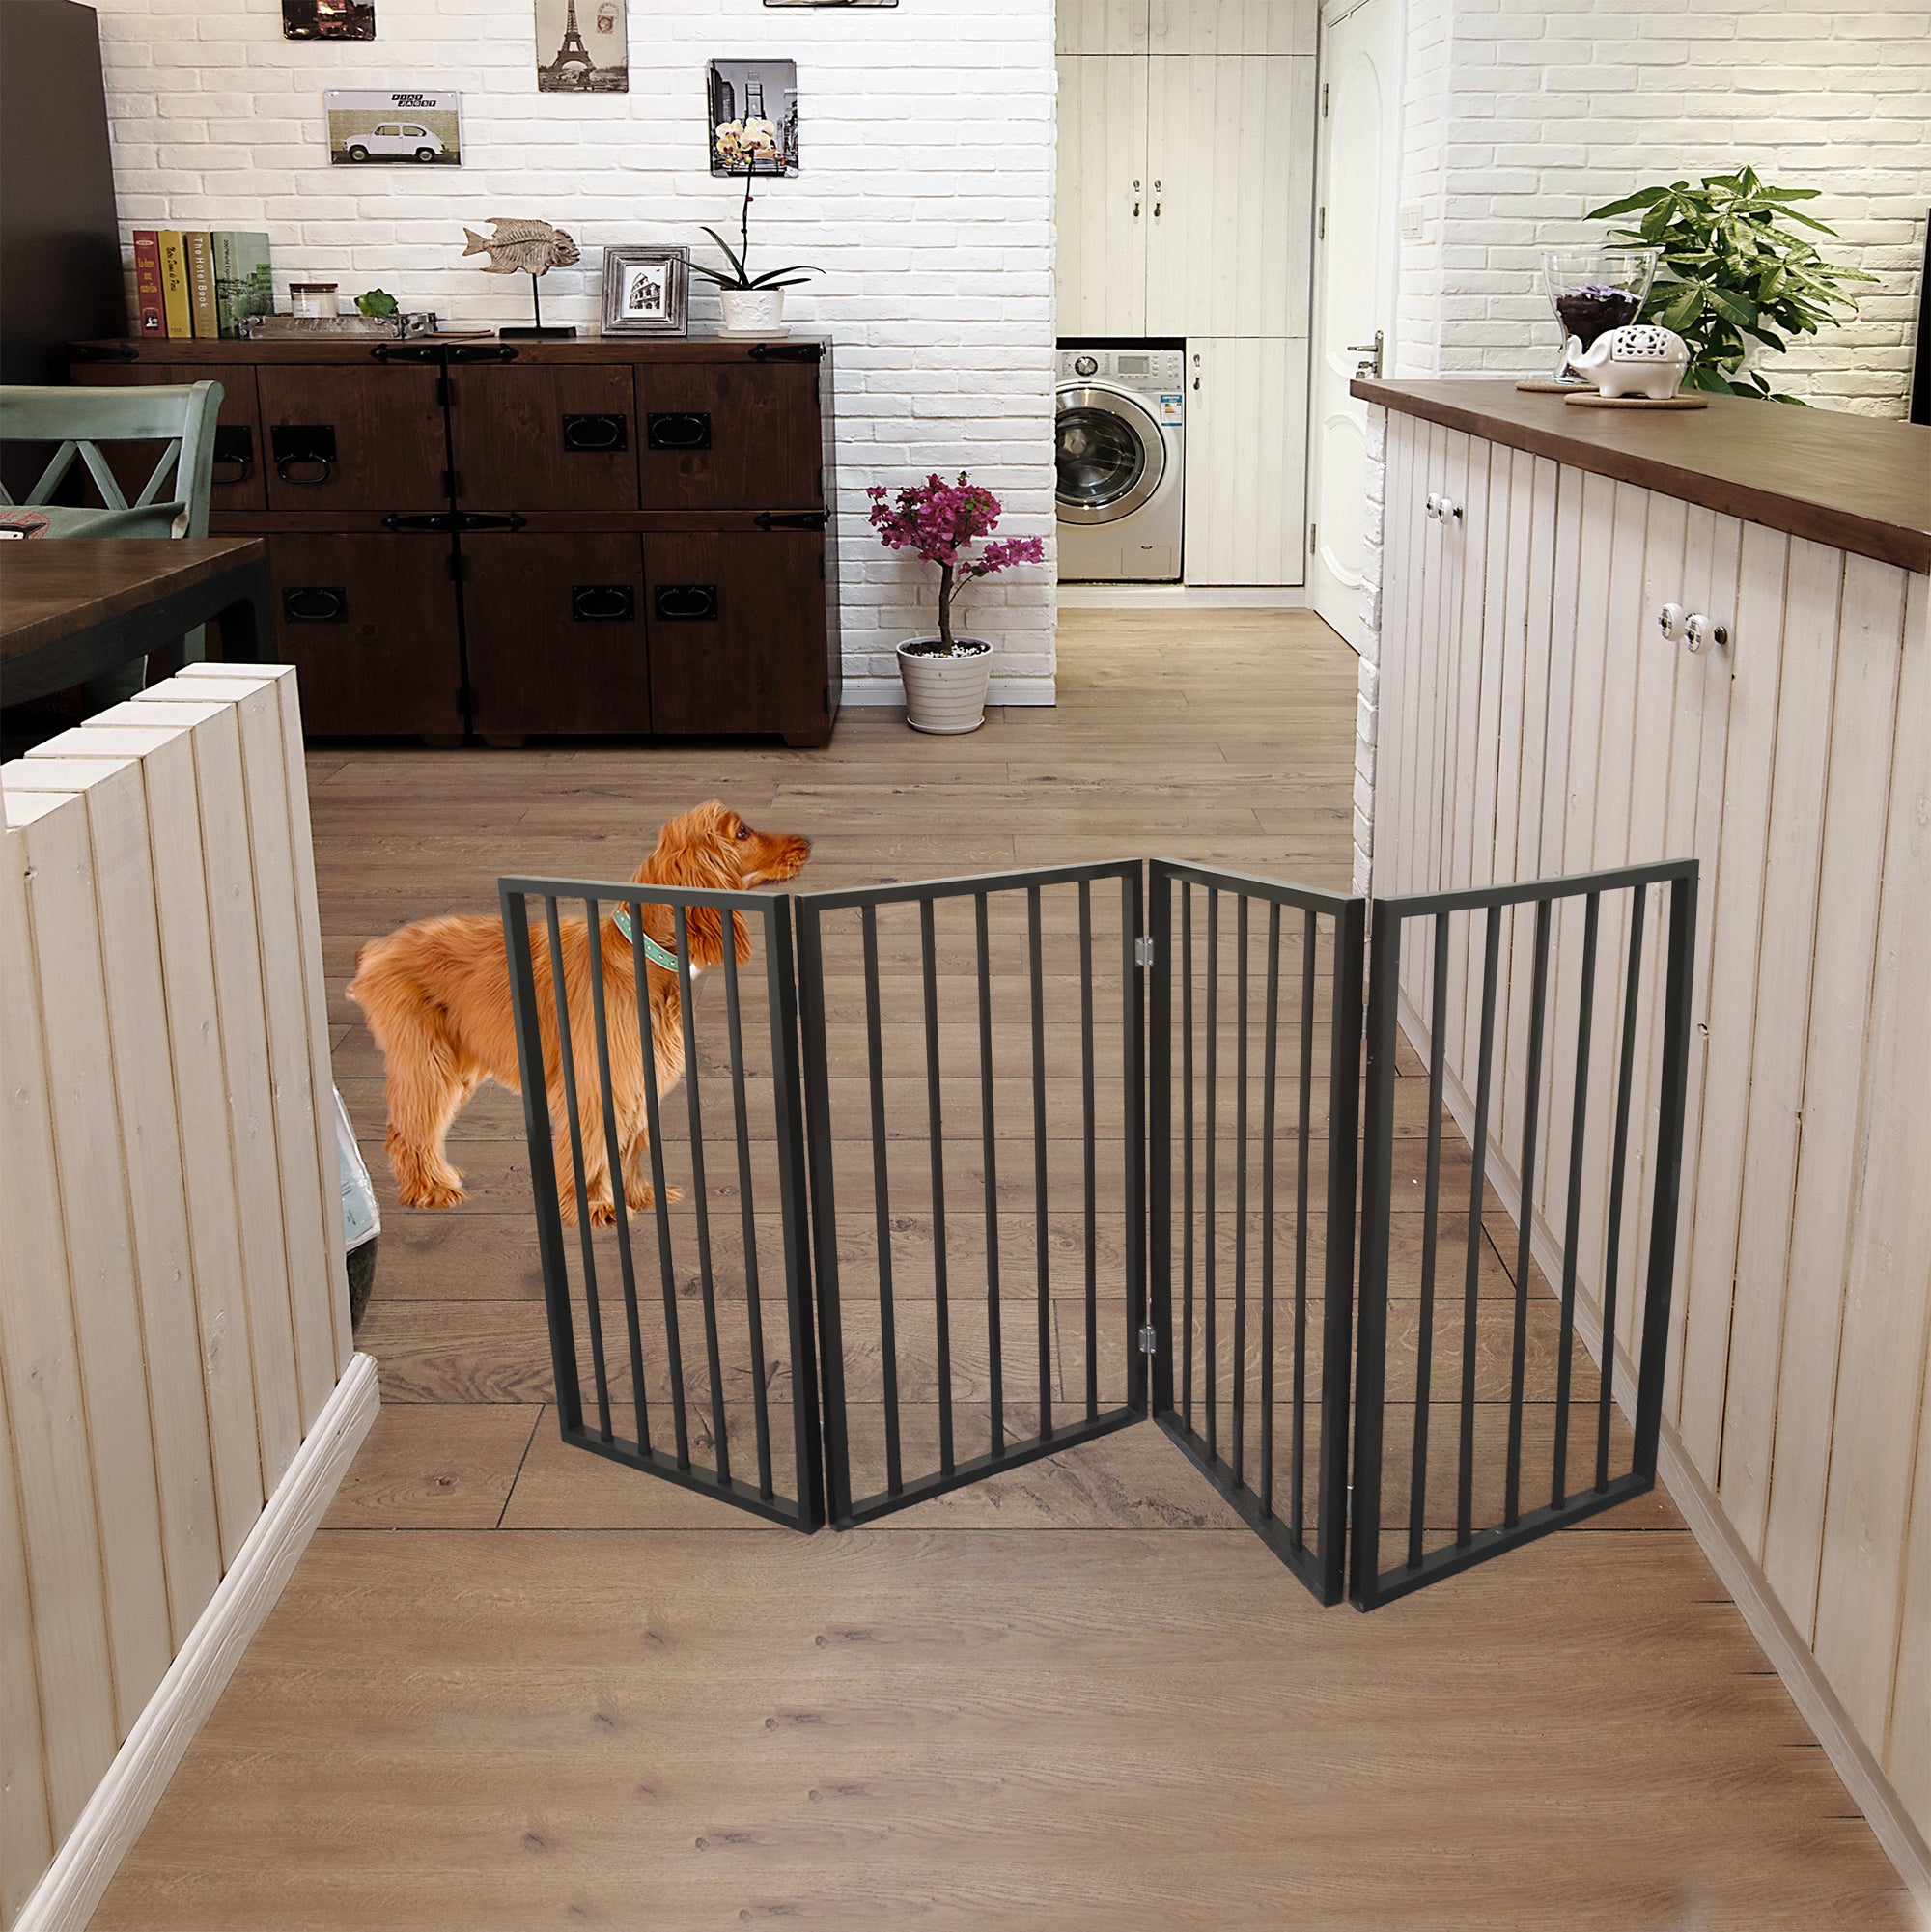 KAINSY Wood Freestanding Pet Gate， Home Traditional Pet Gate 4 Panel - 24 Inch Step Over Fence - Free Standing Folding Z Shape Indoor Doorway Hall Stairs Dog Puppy Gate